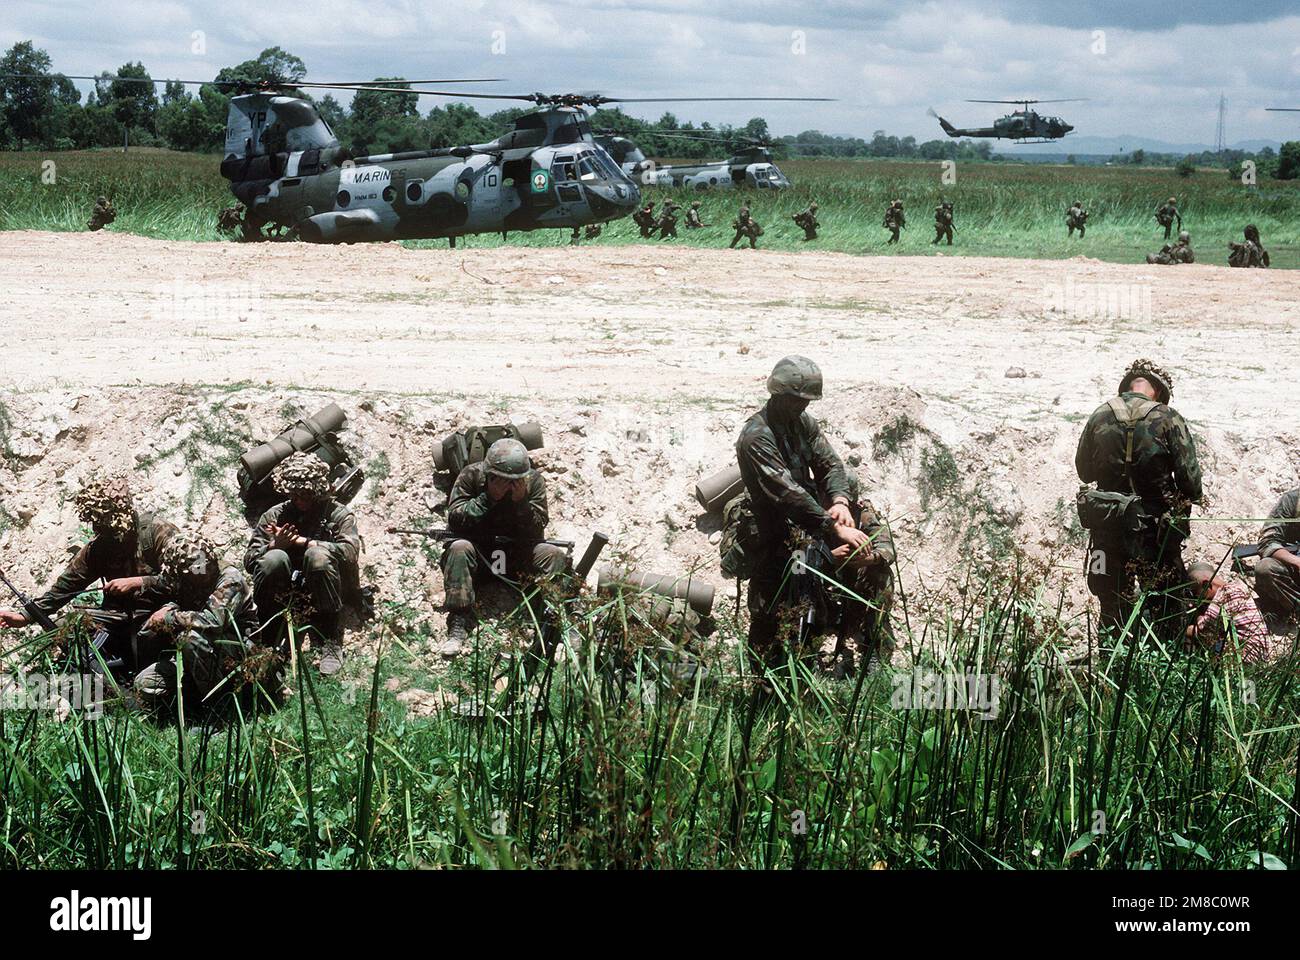 Marines unpack their gear as two CH-46E Sea Knight helicopters of Marine Medium Helicopter Squadron 163 (HMM-163), protected by an AH-1 Sea Cobra helicopter, deploy additional troops into a landing zone during the joint Thai/U.S. Exercise Thalay Thai '89. Subject Operation/Series: THALAY THAI '89 Country: Thailand (THA) Stock Photo